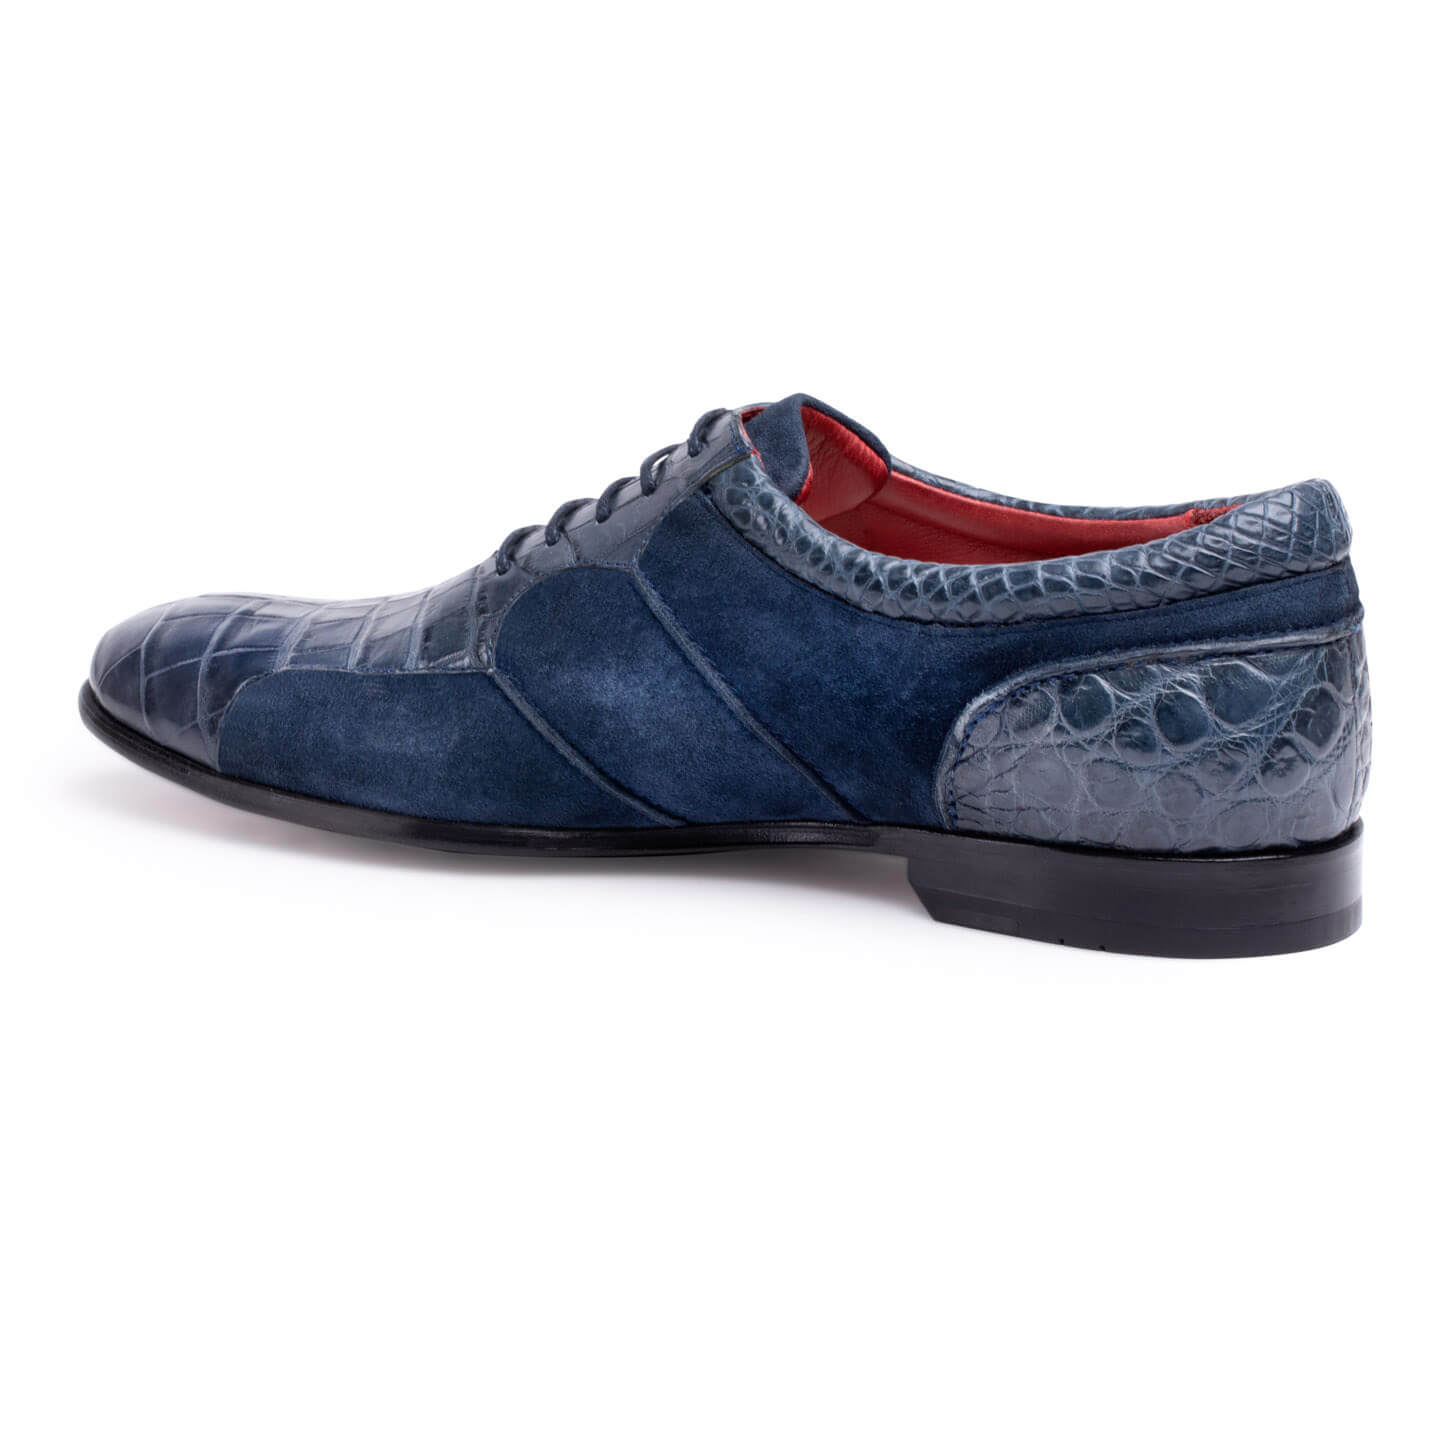 Crocodile leather and suede blue lace-ups